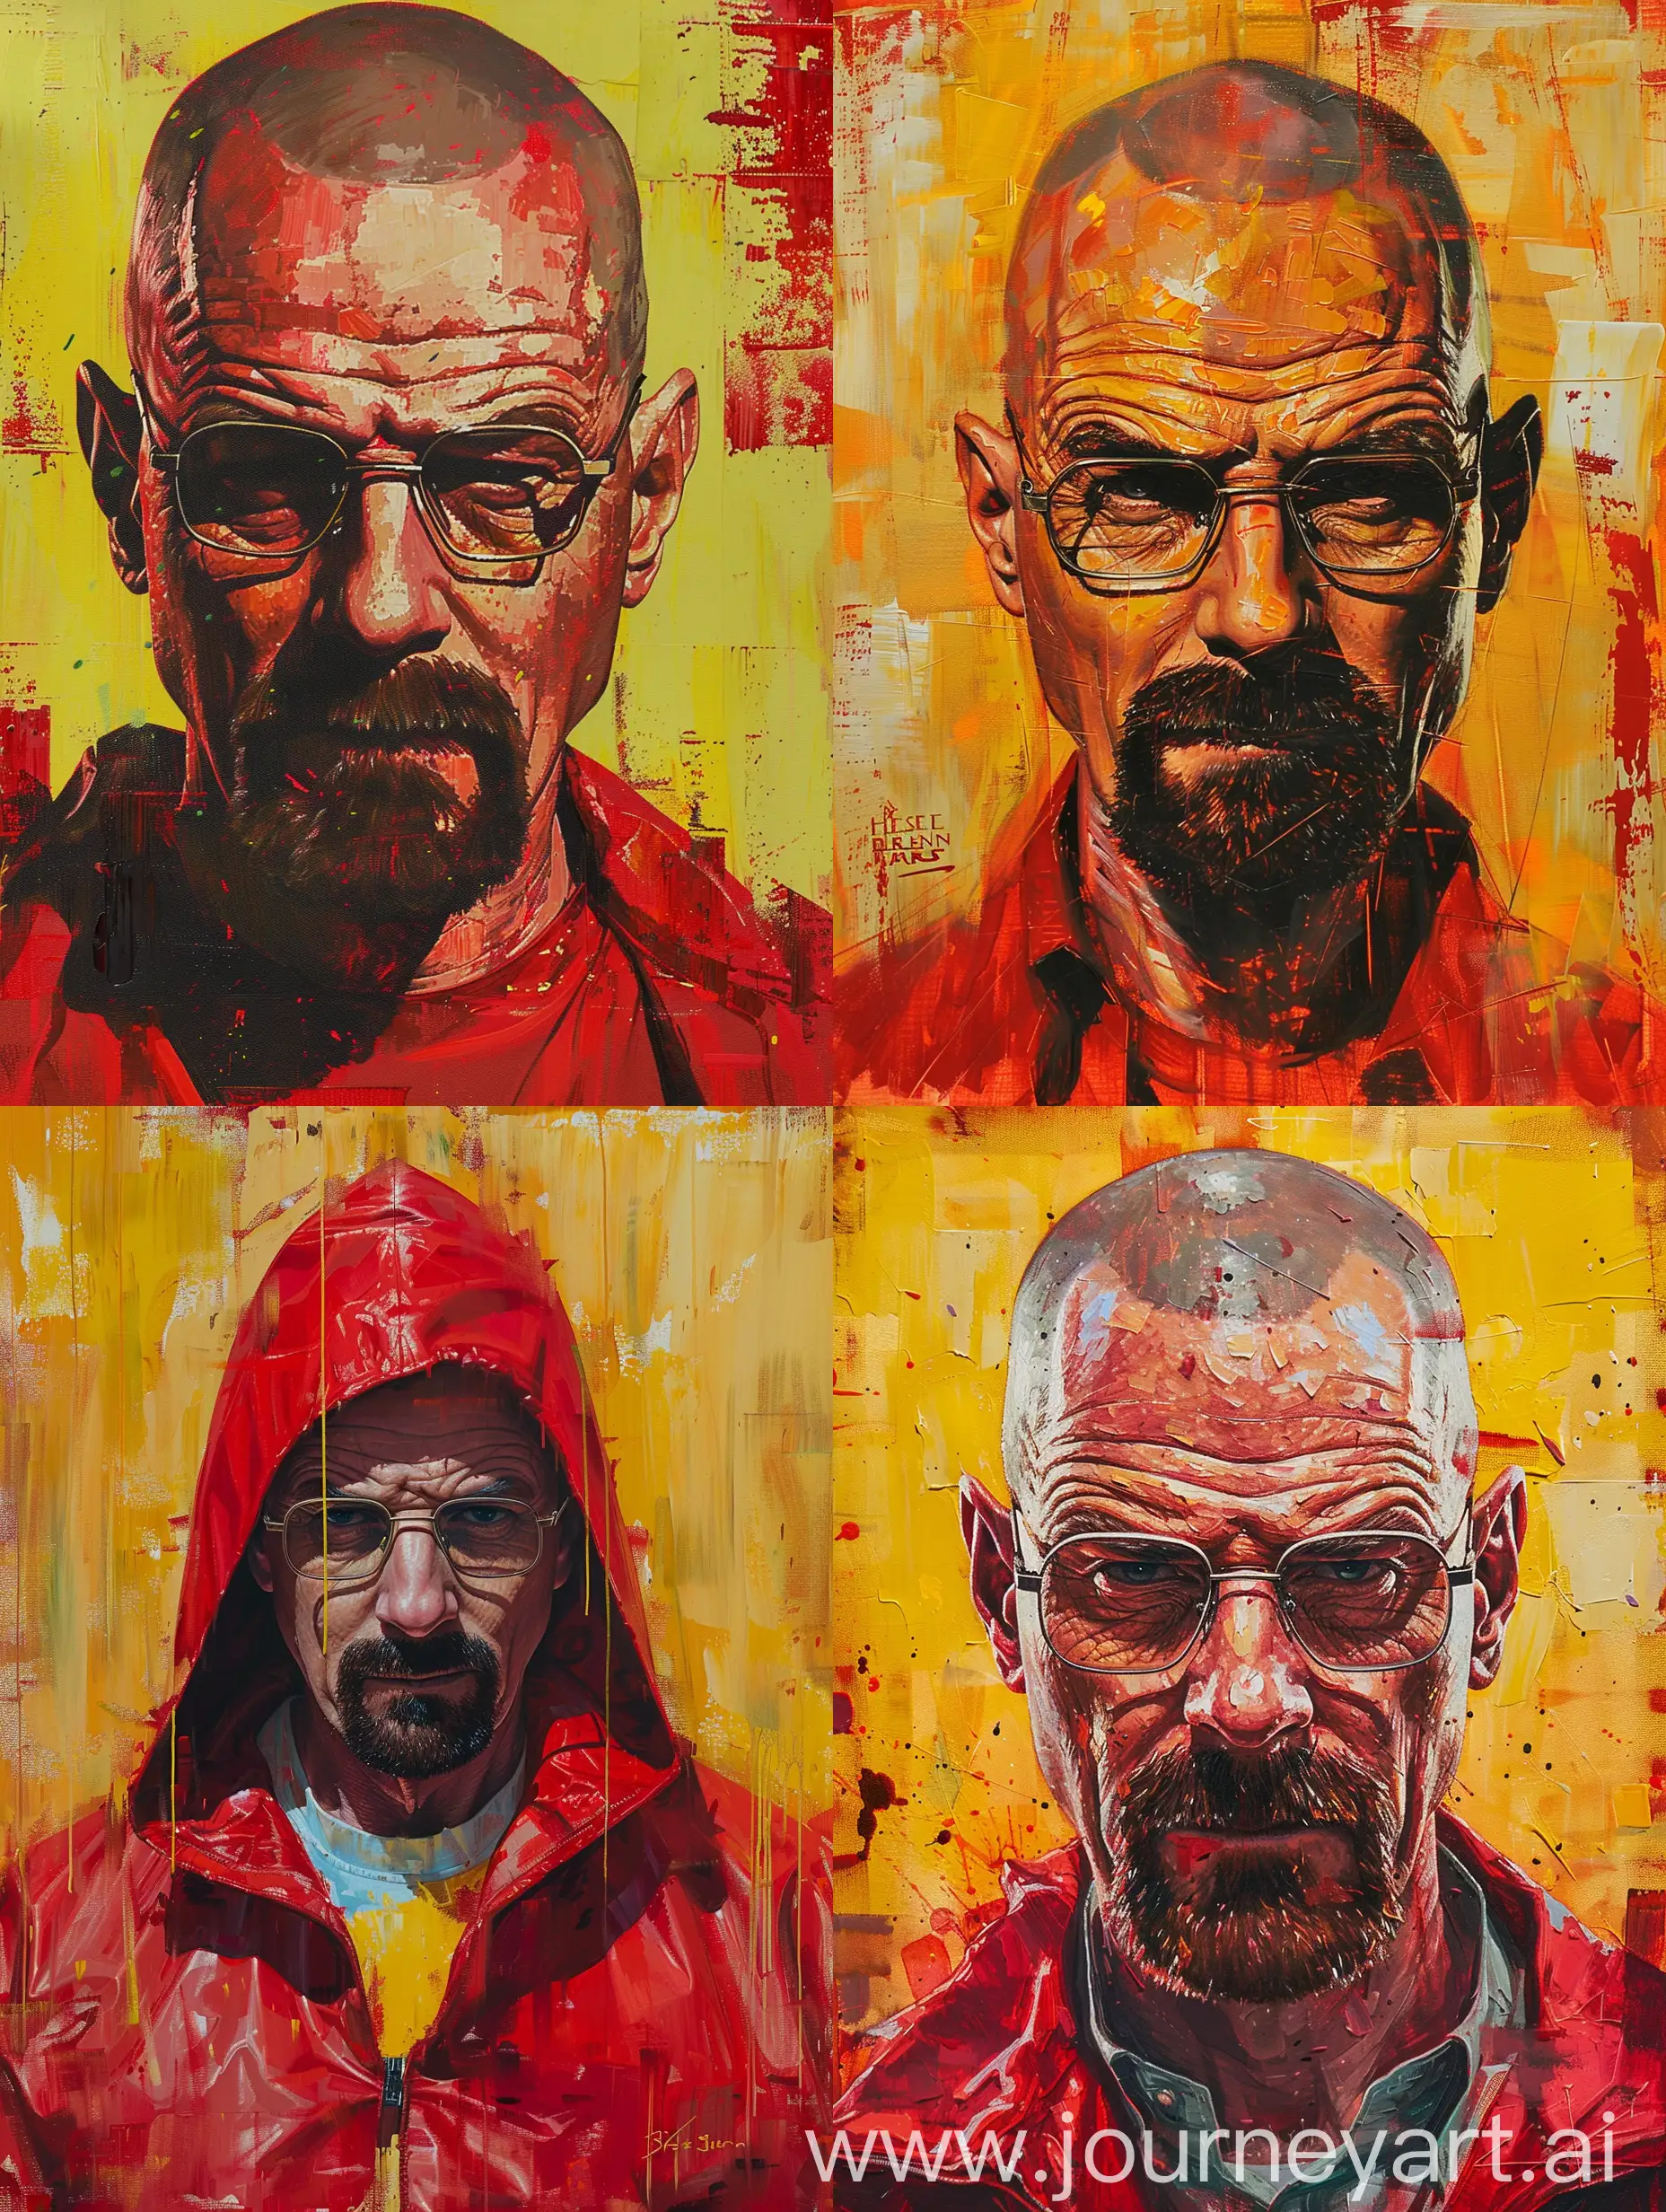 oil painting of heisenberg of breaking bad in star wars style with a color palette of bright red and moody yellow. There are also touches of bright skin tone in details and visible brush strokes
--c 3